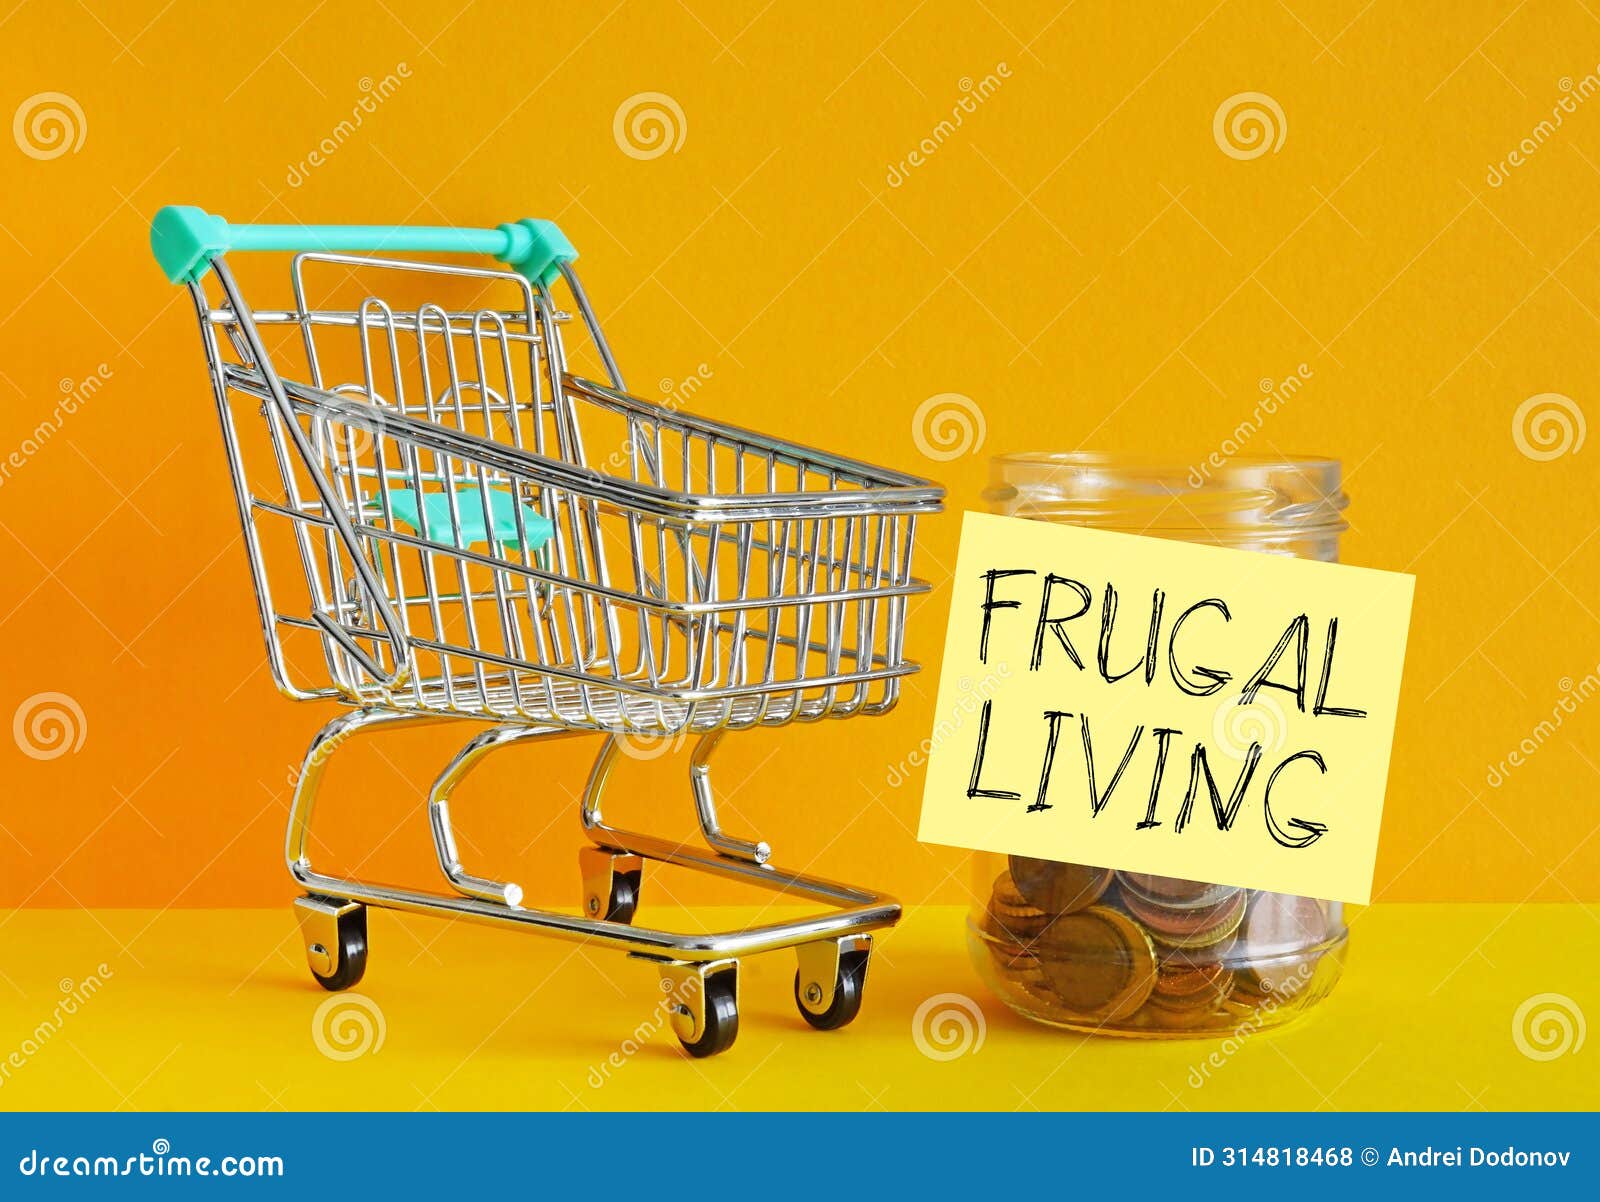 frugal living and frugality are shown using the text